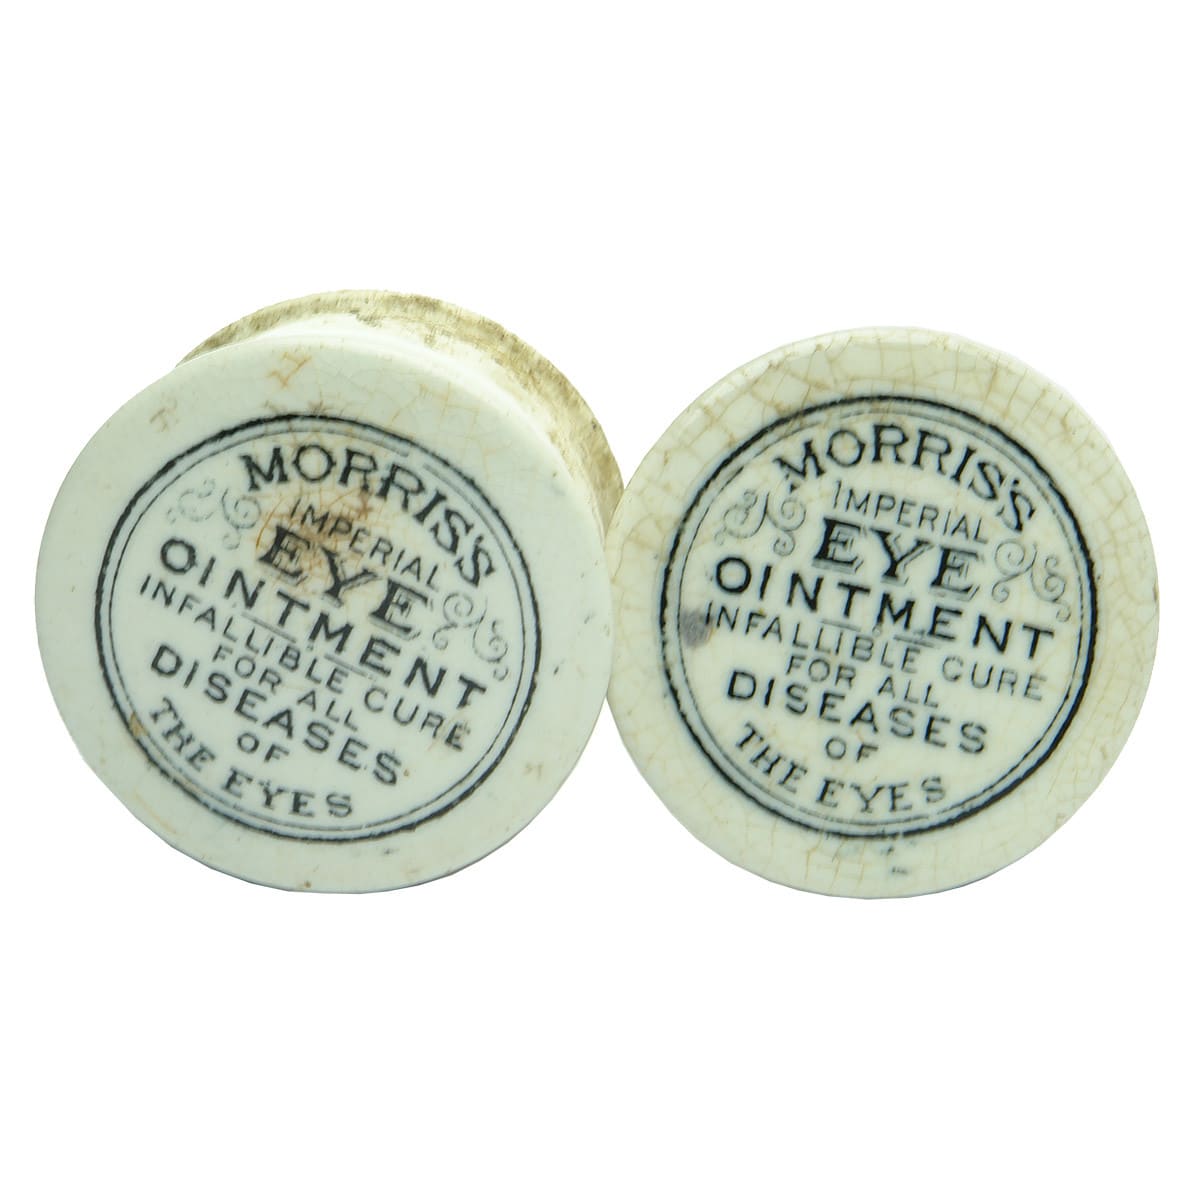 Pair of Pot Lids. Both Morris's Imperial Eye Ointment. One Base. (Melbourne, Victoria)